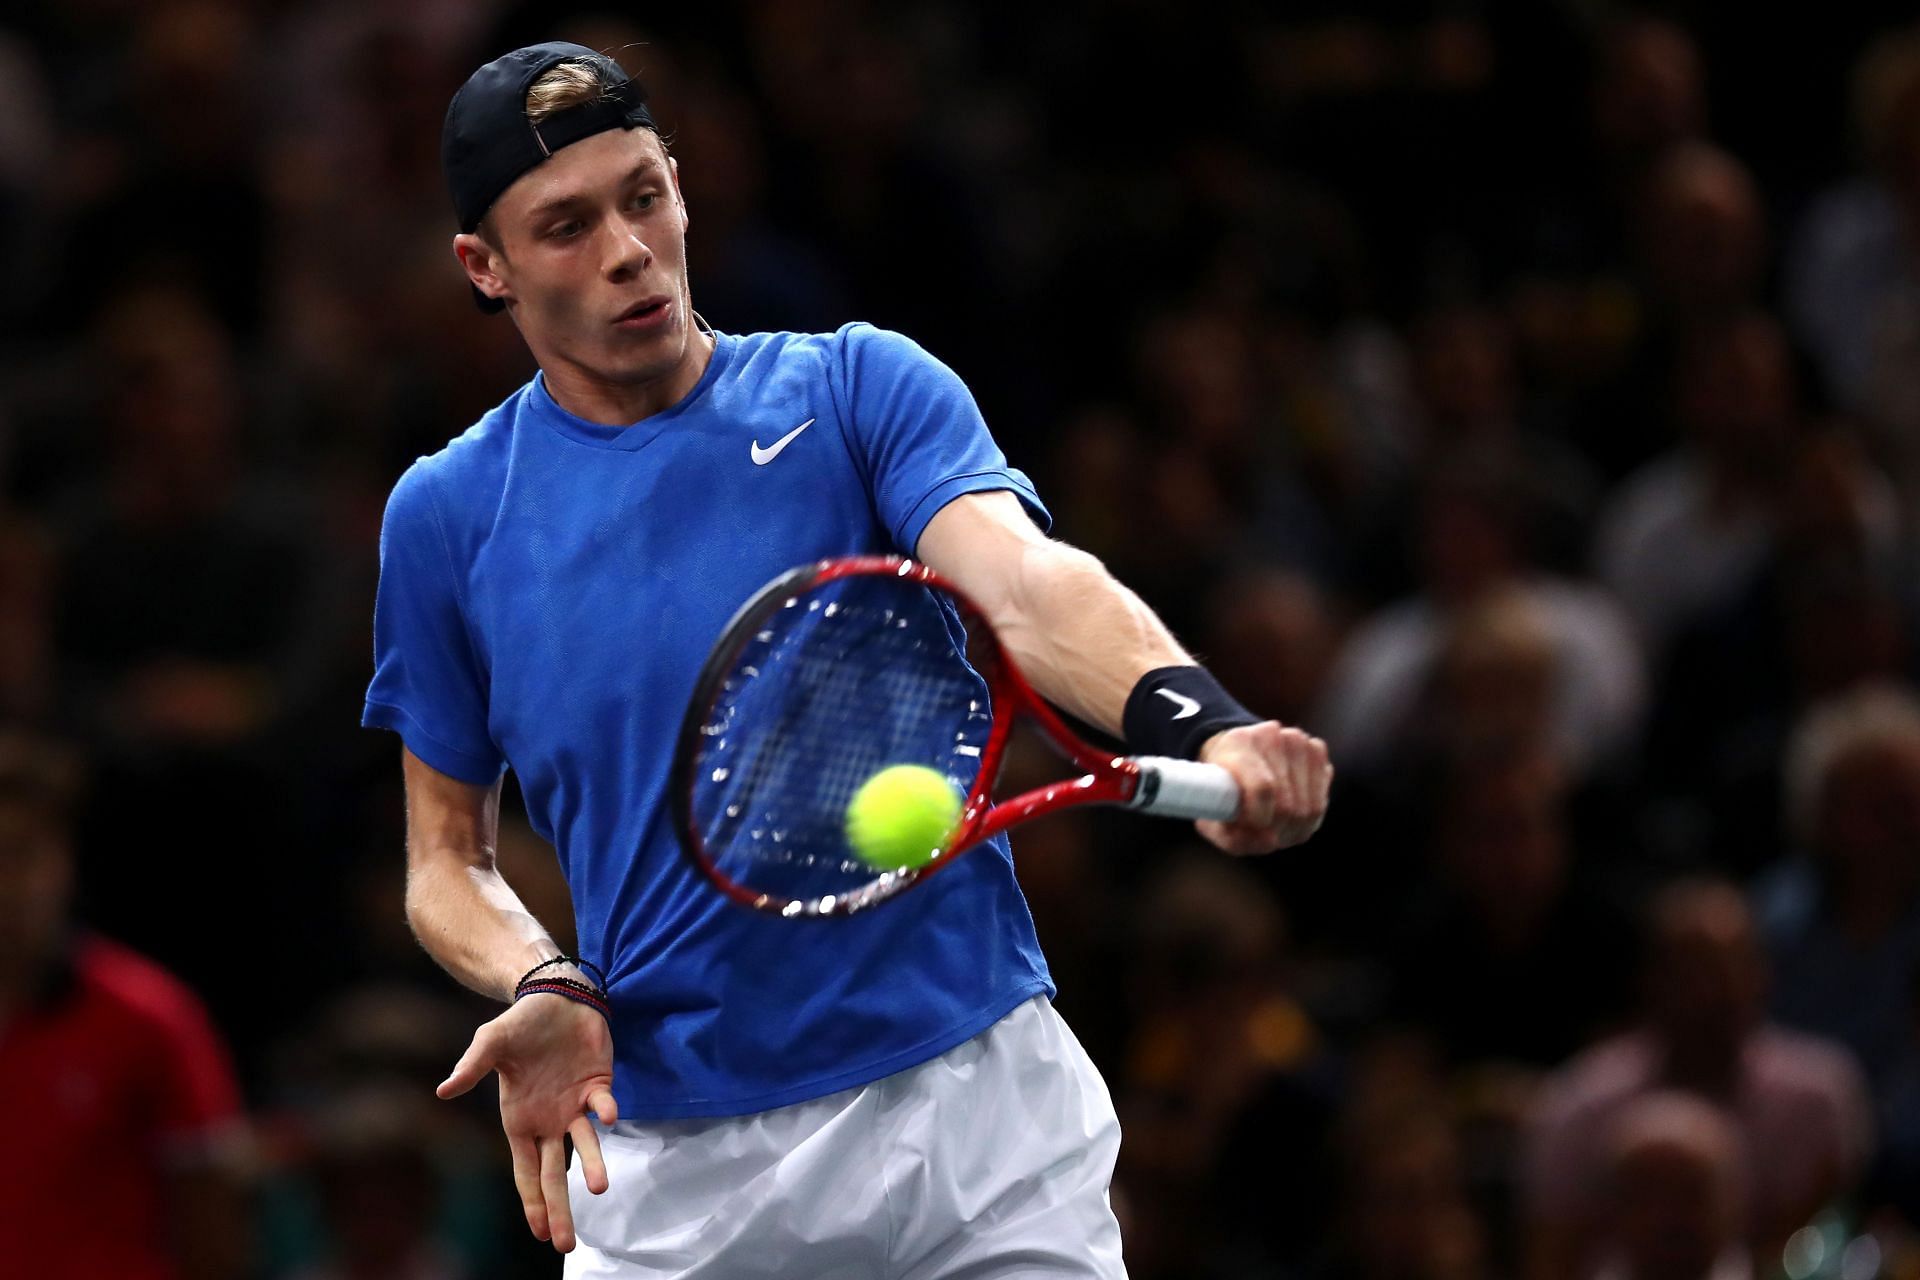 Denis Shapovalov received a walkover from Nadal in the Paris-Bercy semis in 2019.